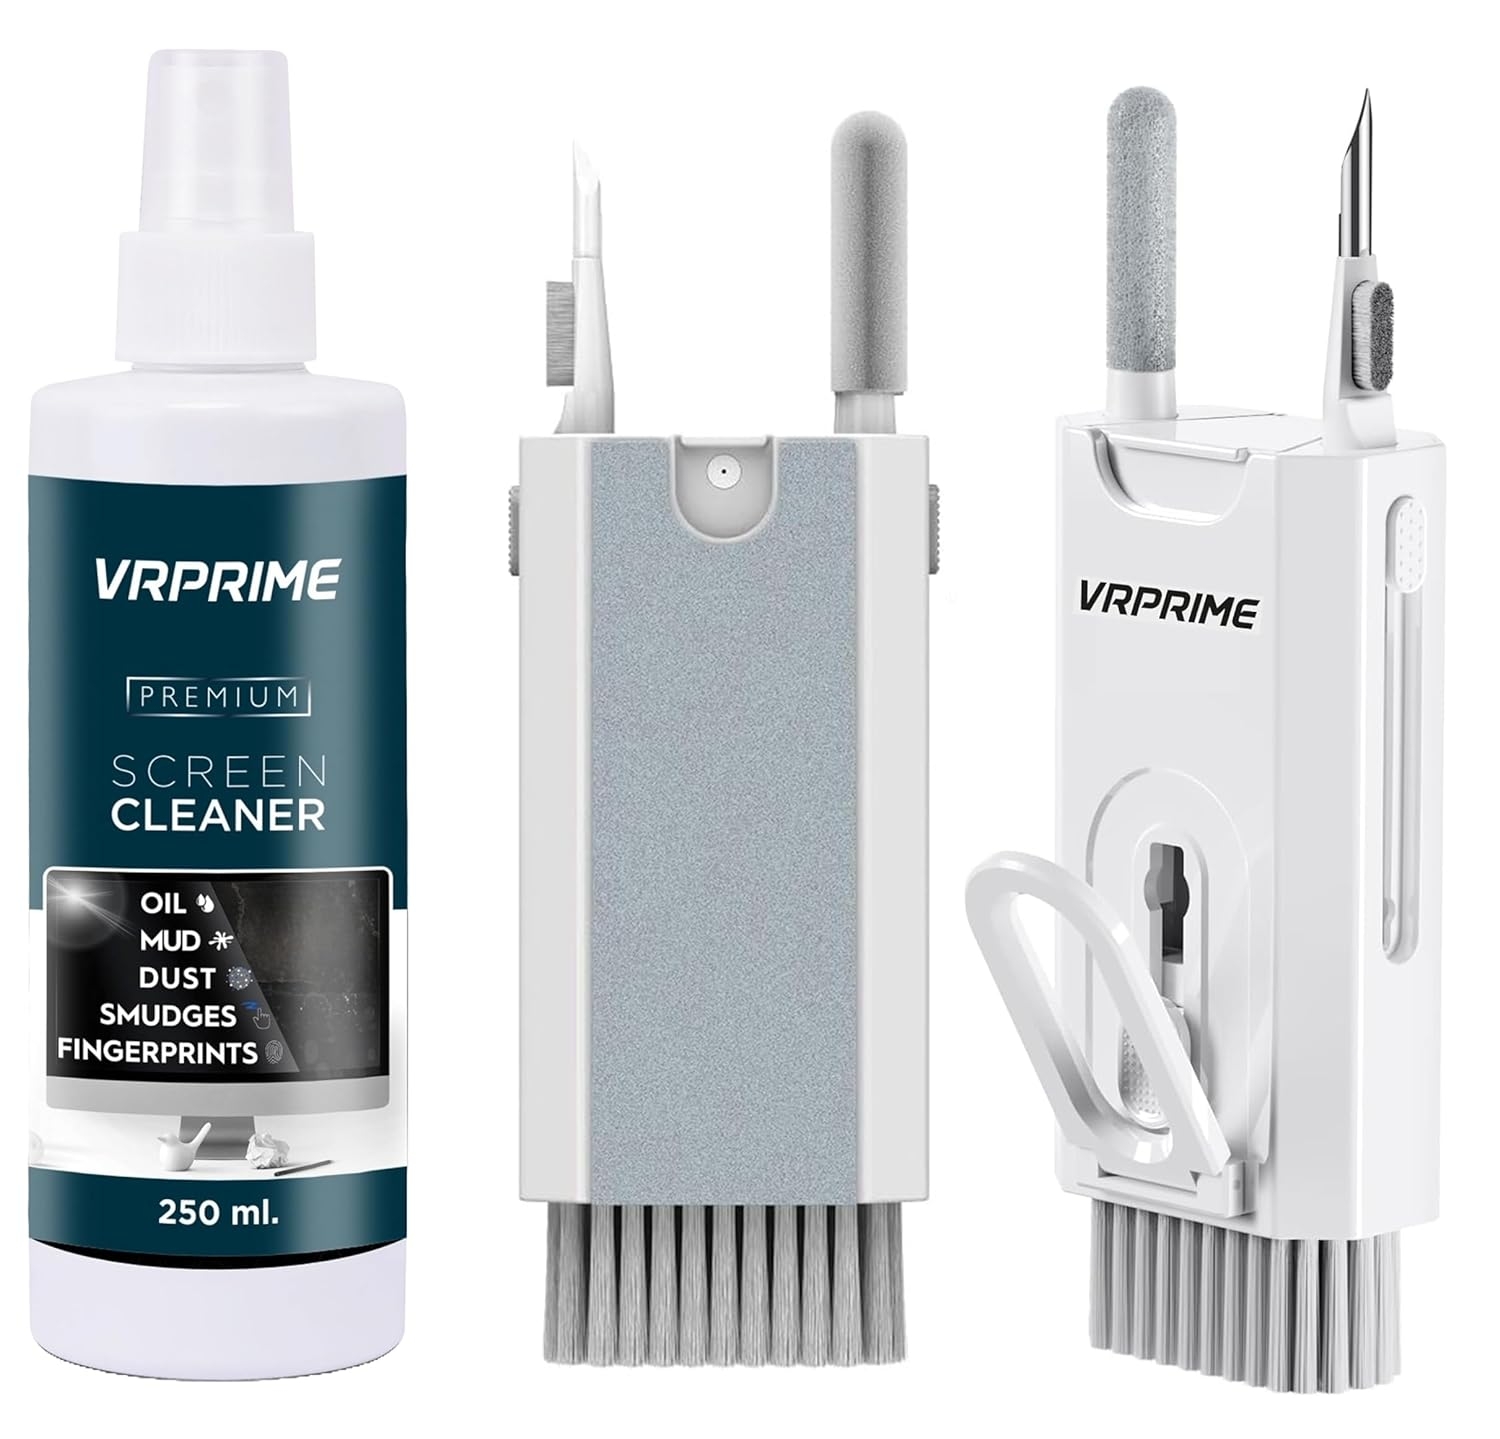 VRPRIME 8-in-1 Laptop Screen Cleaning Kit Tools With 250Ml Screen Cleaner Liquid Spray for Keyboard, Earbuds